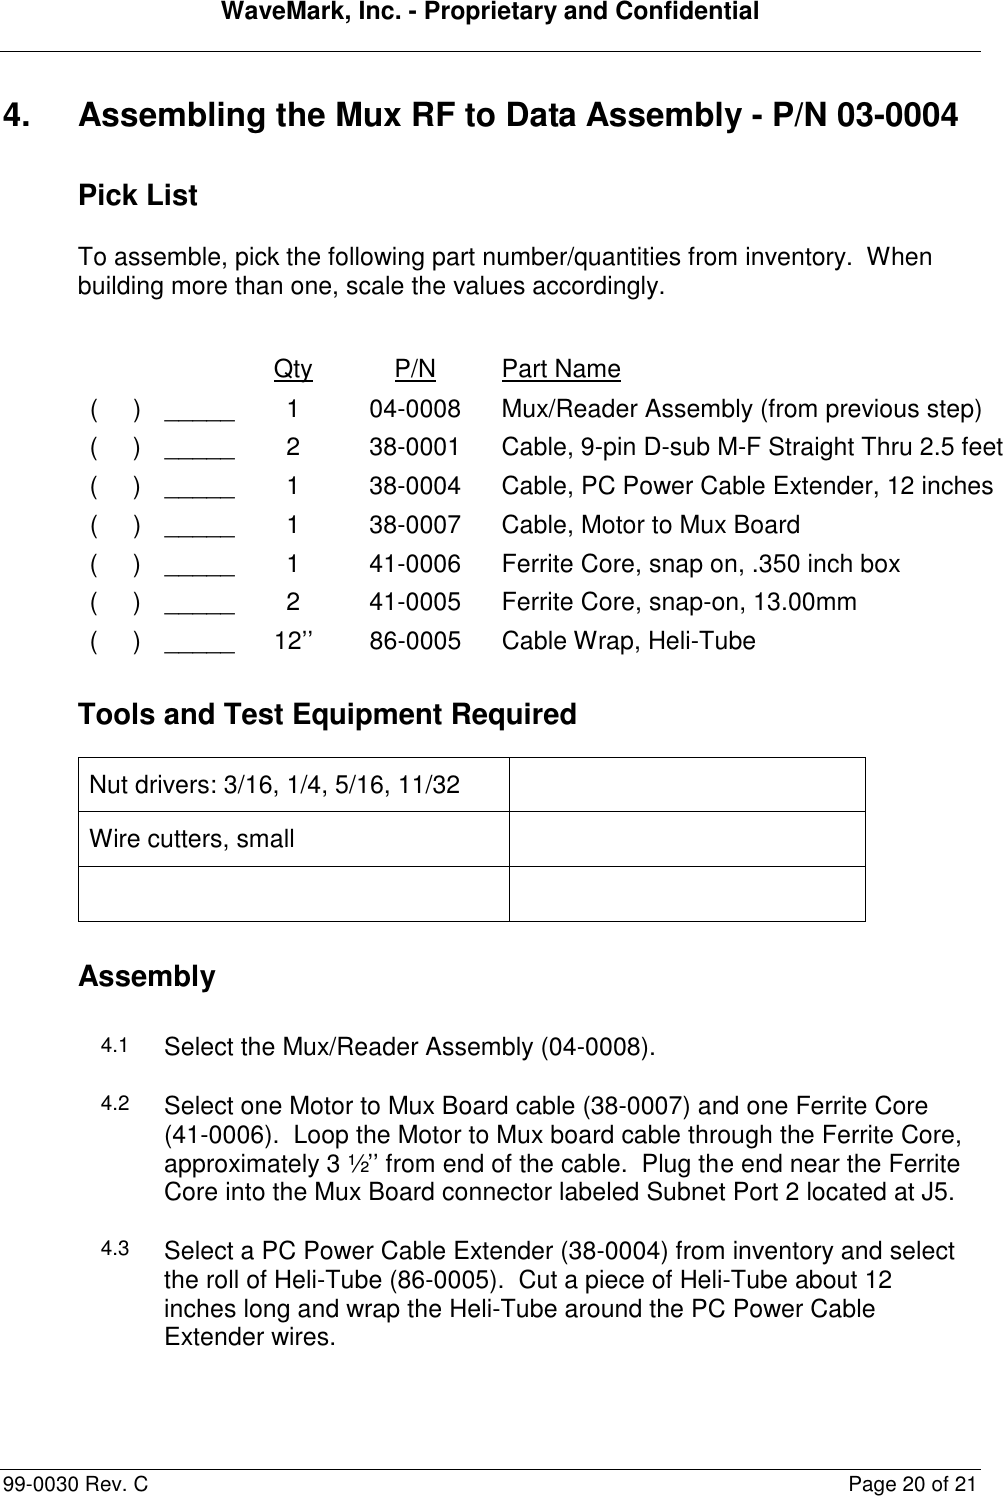 WaveMark, Inc. - Proprietary and Confidential  99-0030 Rev. C  Page 20 of 21 4.  Assembling the Mux RF to Data Assembly - P/N 03-0004 Pick List To assemble, pick the following part number/quantities from inventory.  When building more than one, scale the values accordingly.      Qty  P/N  Part Name (     ) _____ 1  04-0008  Mux/Reader Assembly (from previous step) (     ) _____ 2  38-0001  Cable, 9-pin D-sub M-F Straight Thru 2.5 feet (     ) _____ 1  38-0004  Cable, PC Power Cable Extender, 12 inches (     ) _____ 1  38-0007  Cable, Motor to Mux Board (     ) _____ 1  41-0006  Ferrite Core, snap on, .350 inch box (     ) _____ 2  41-0005  Ferrite Core, snap-on, 13.00mm (     ) _____ 12’’  86-0005  Cable Wrap, Heli-Tube Tools and Test Equipment Required Nut drivers: 3/16, 1/4, 5/16, 11/32   Wire cutters, small      Assembly 4.1 Select the Mux/Reader Assembly (04-0008). 4.2 Select one Motor to Mux Board cable (38-0007) and one Ferrite Core (41-0006).  Loop the Motor to Mux board cable through the Ferrite Core, approximately 3 ½’’ from end of the cable.  Plug the end near the Ferrite Core into the Mux Board connector labeled Subnet Port 2 located at J5. 4.3 Select a PC Power Cable Extender (38-0004) from inventory and select the roll of Heli-Tube (86-0005).  Cut a piece of Heli-Tube about 12 inches long and wrap the Heli-Tube around the PC Power Cable Extender wires. 